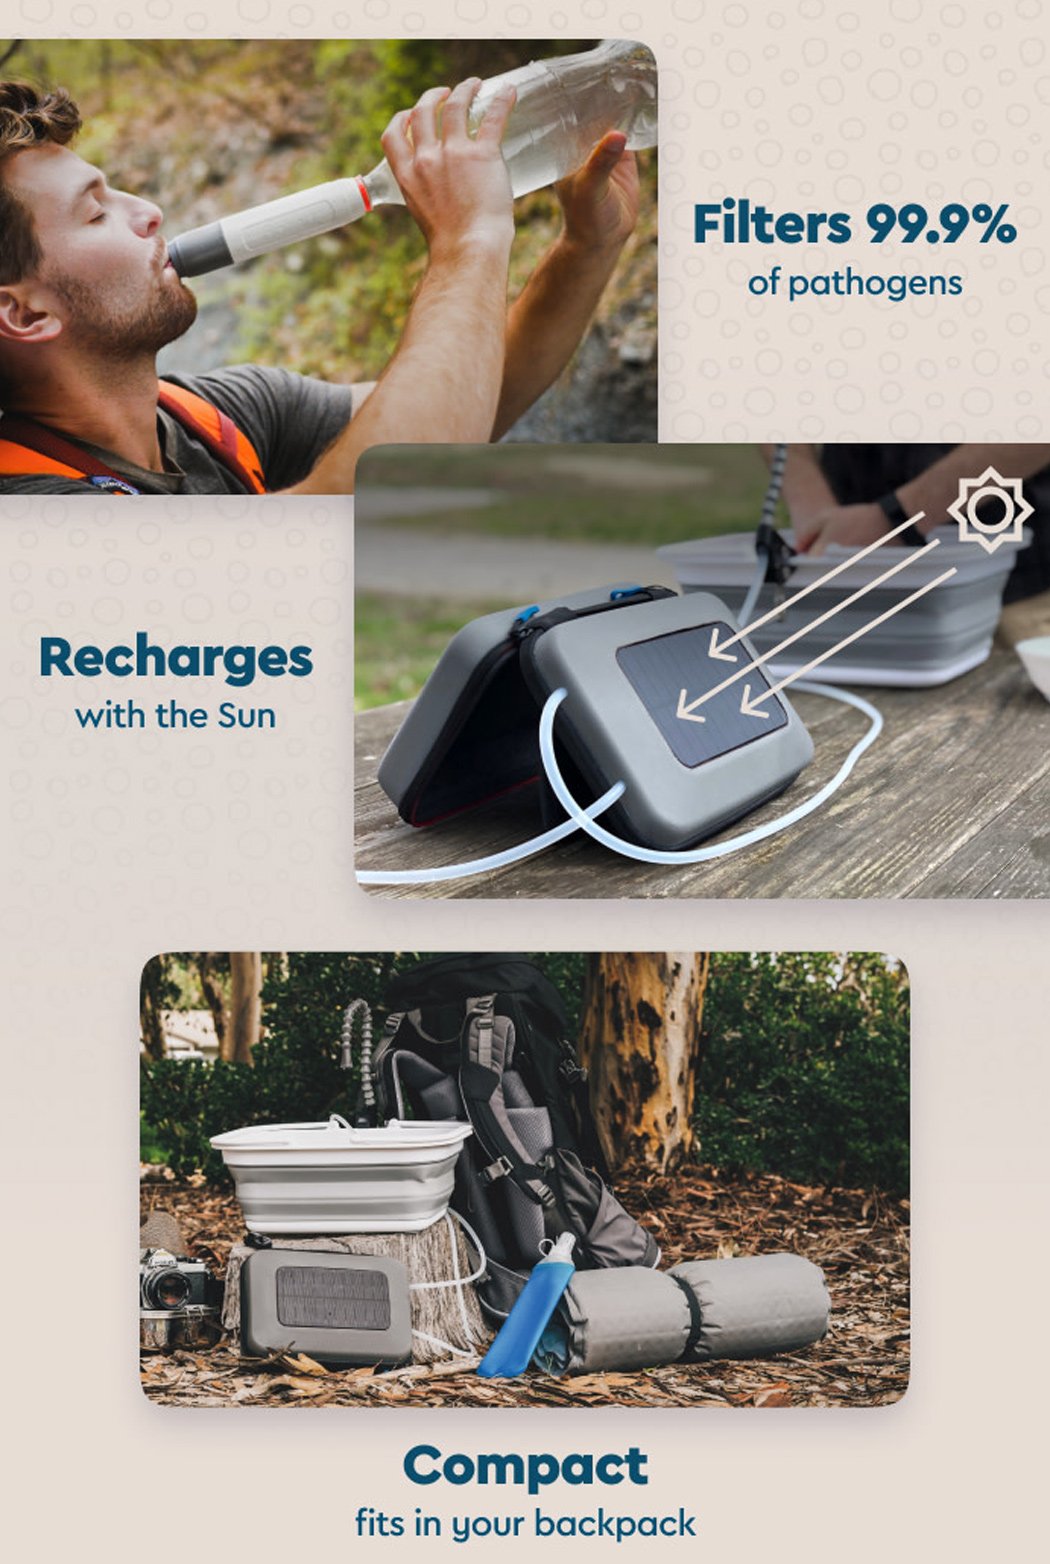 https://www.yankodesign.com/images/design_news/2020/07/this-solar-powered-water-pump-purifier-lets-you-take-hot-showers-while-camping/01-GoSun_portable-purifier-and-washing-station_solar_camping.jpg